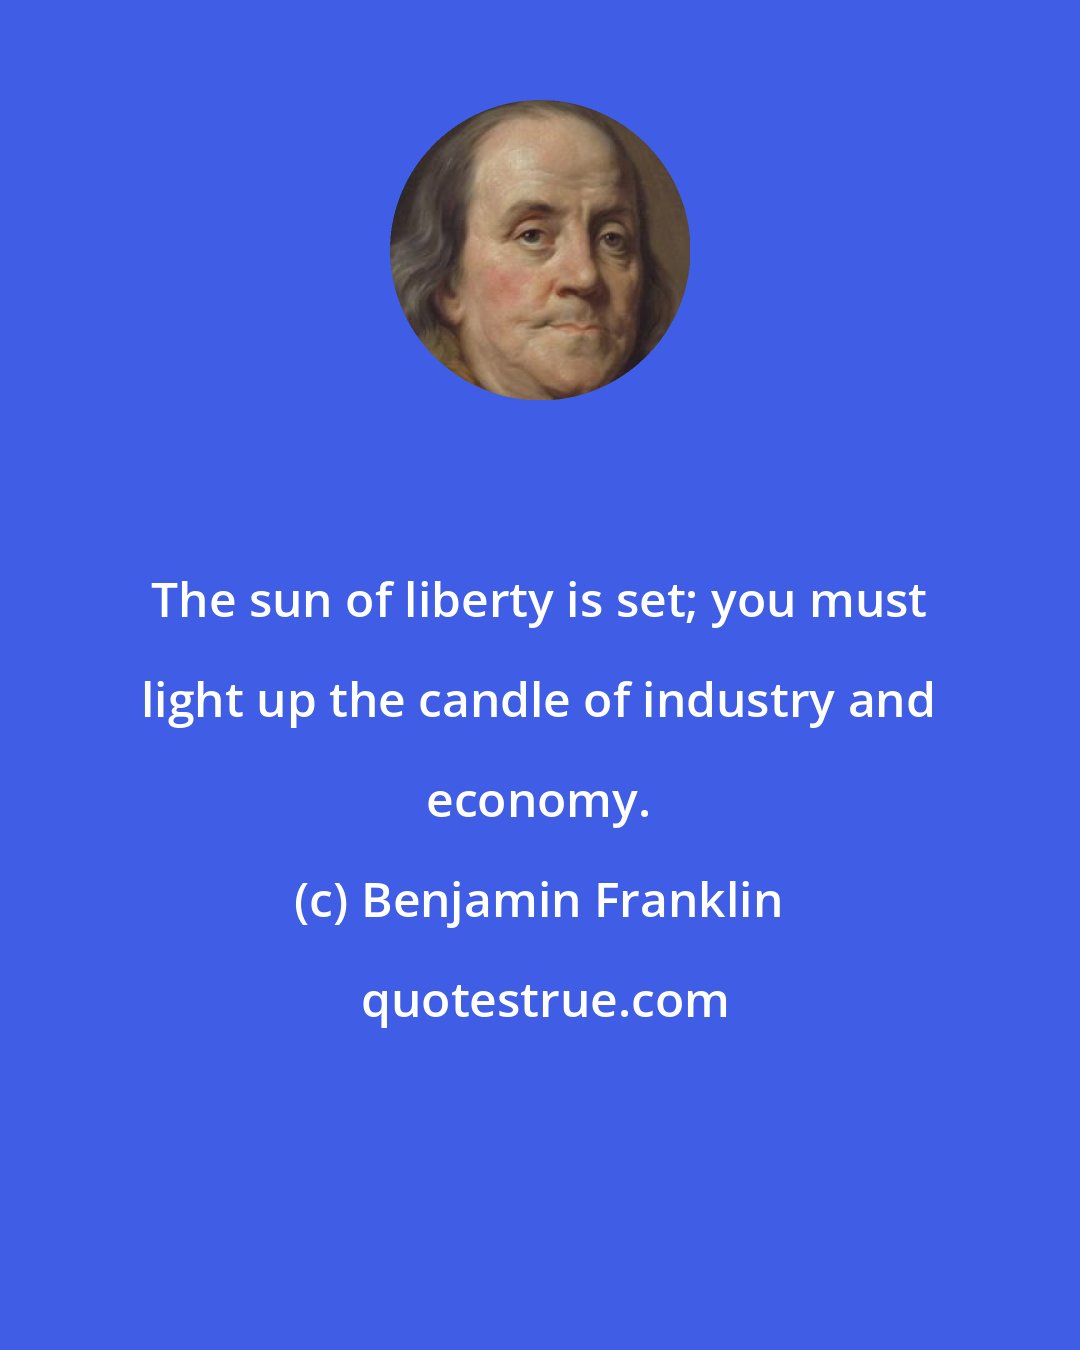 Benjamin Franklin: The sun of liberty is set; you must light up the candle of industry and economy.